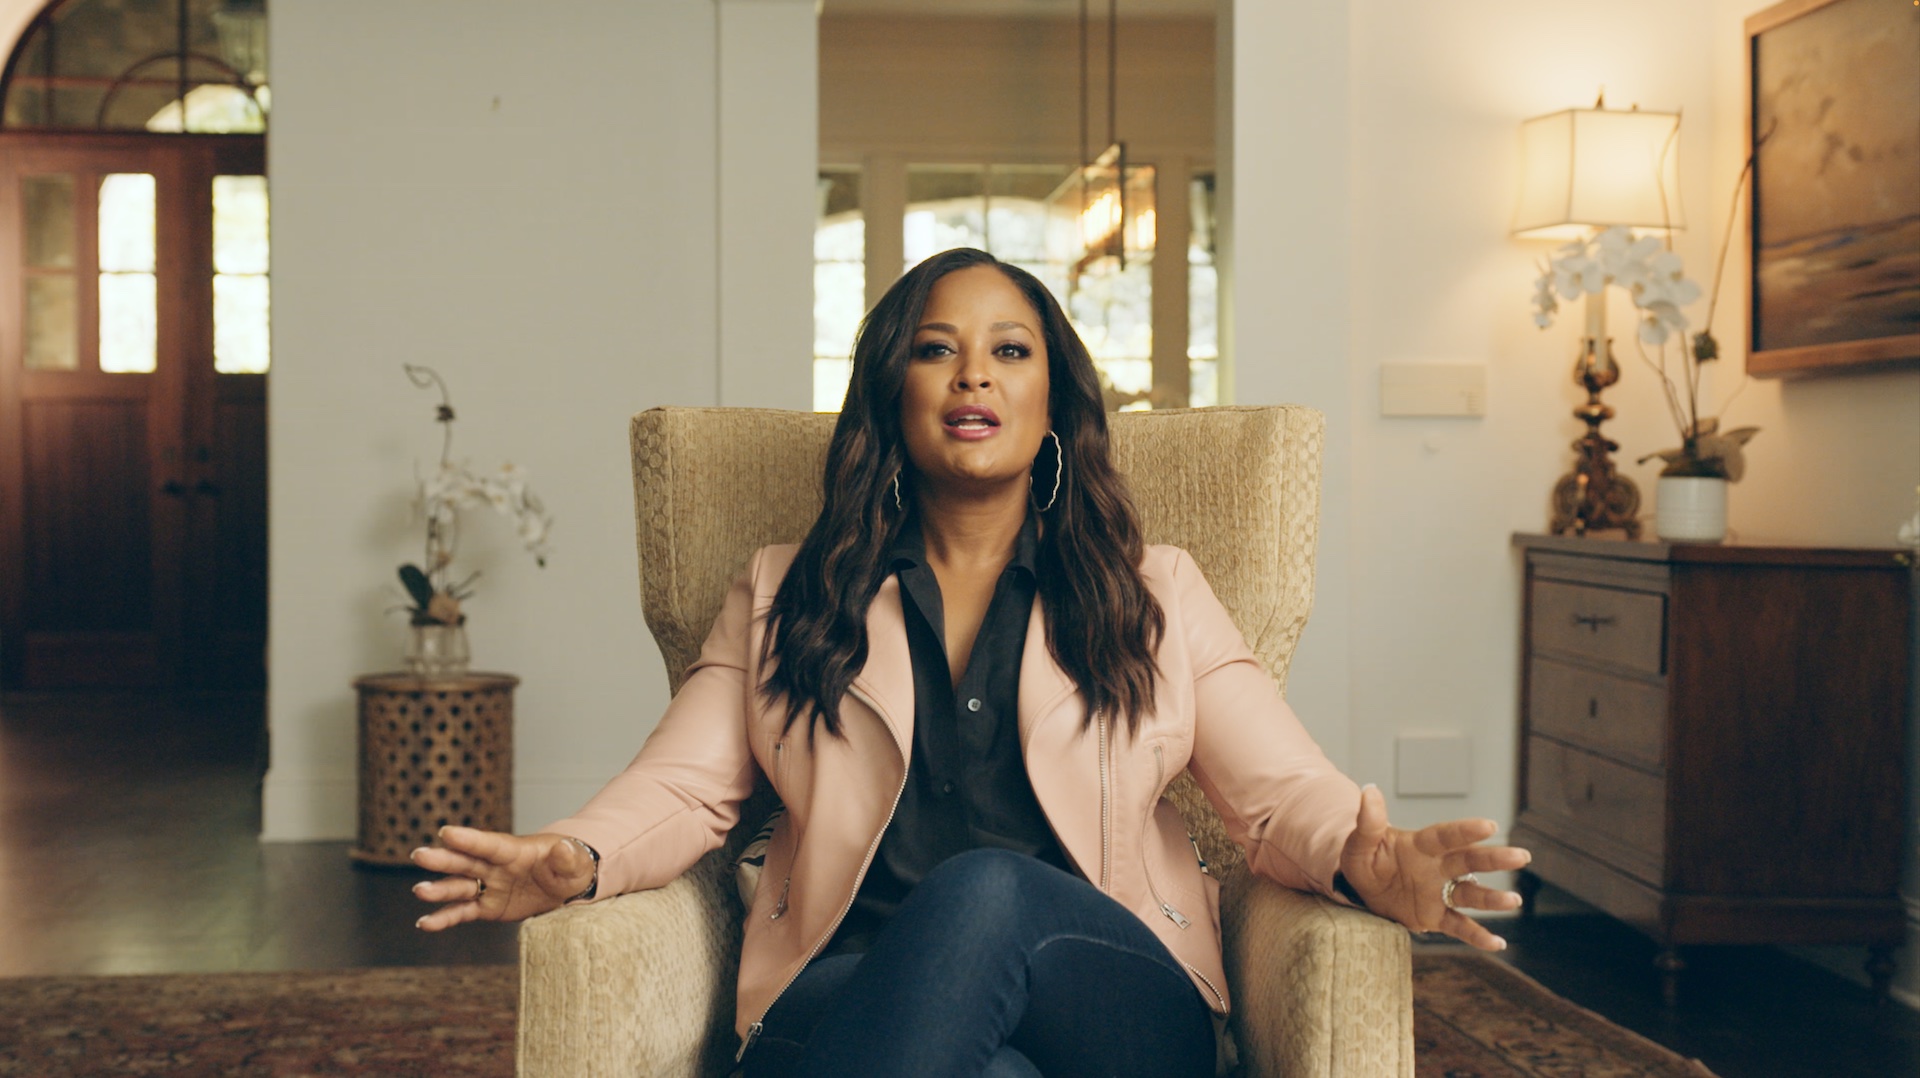 Black Pop Laila Ali headshot with her talking to the camera sitting in a beige chair